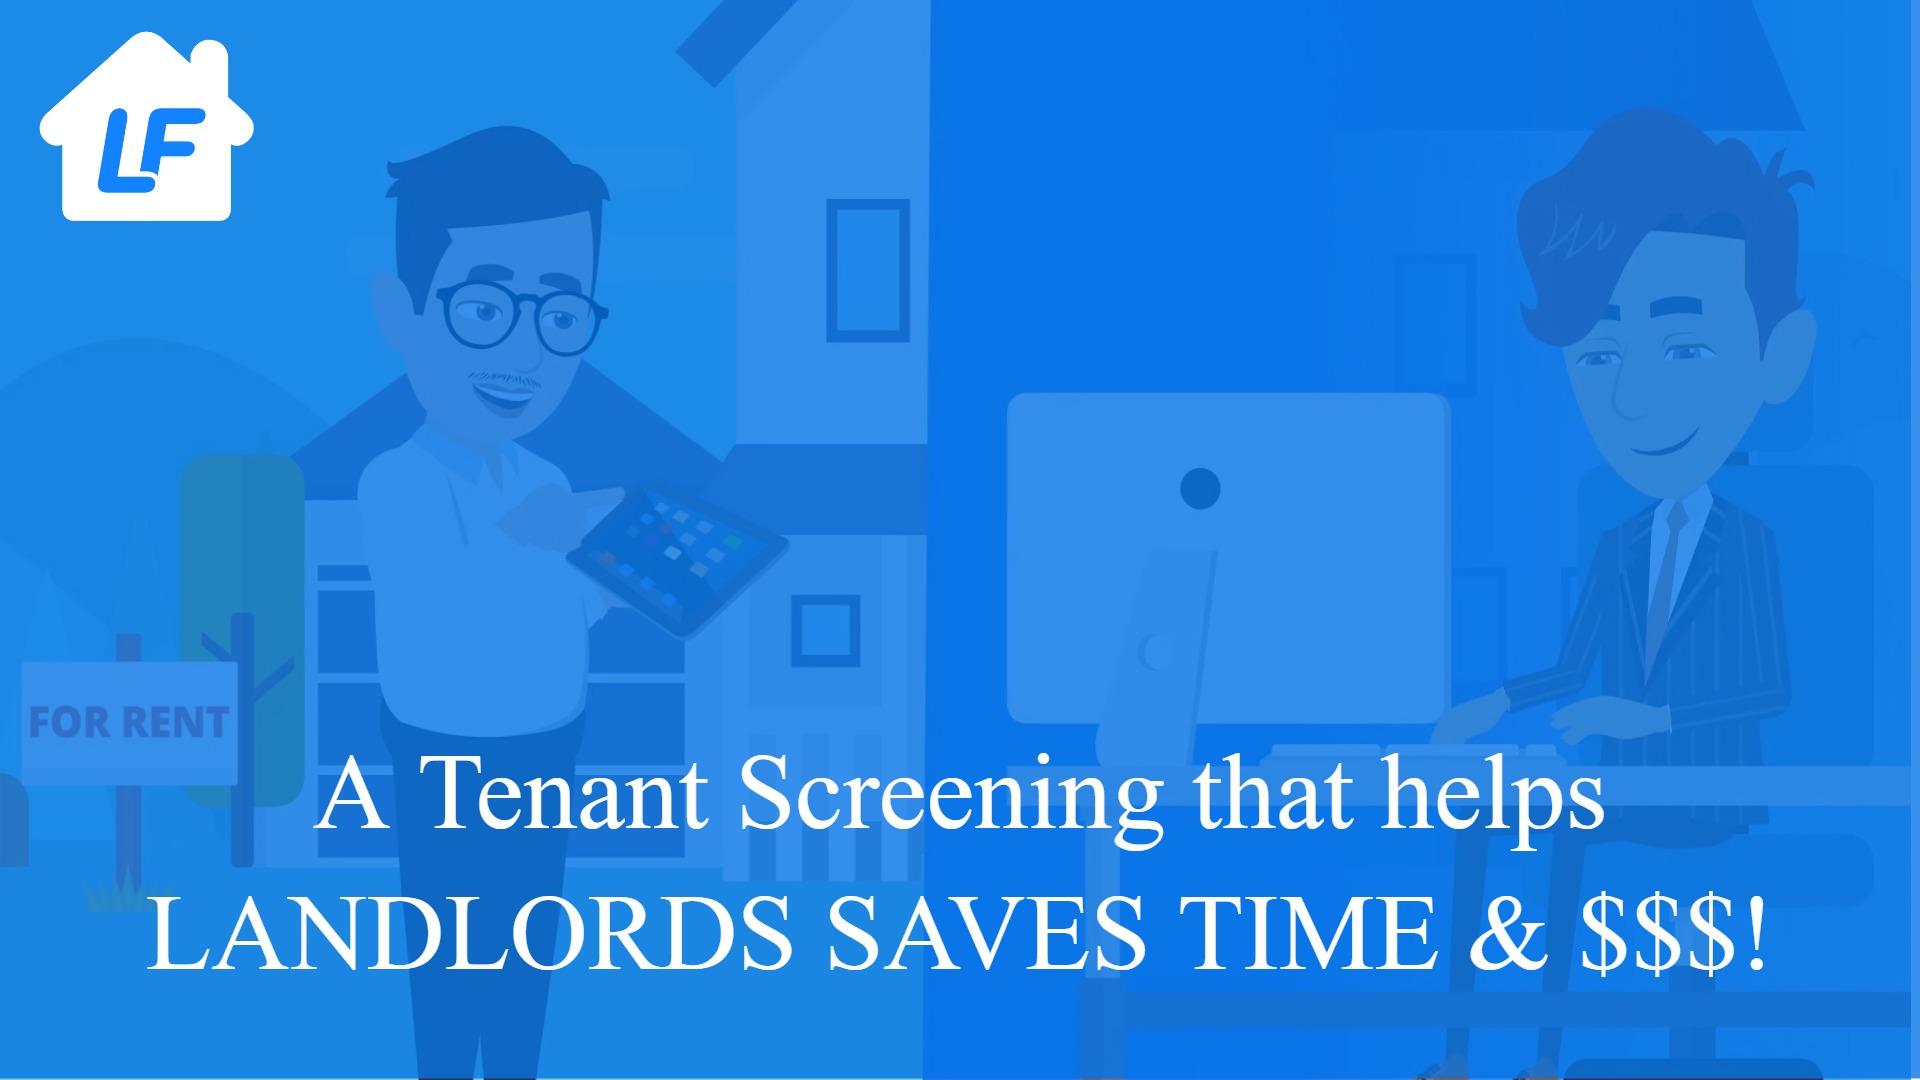 Tenant screening saves time and money